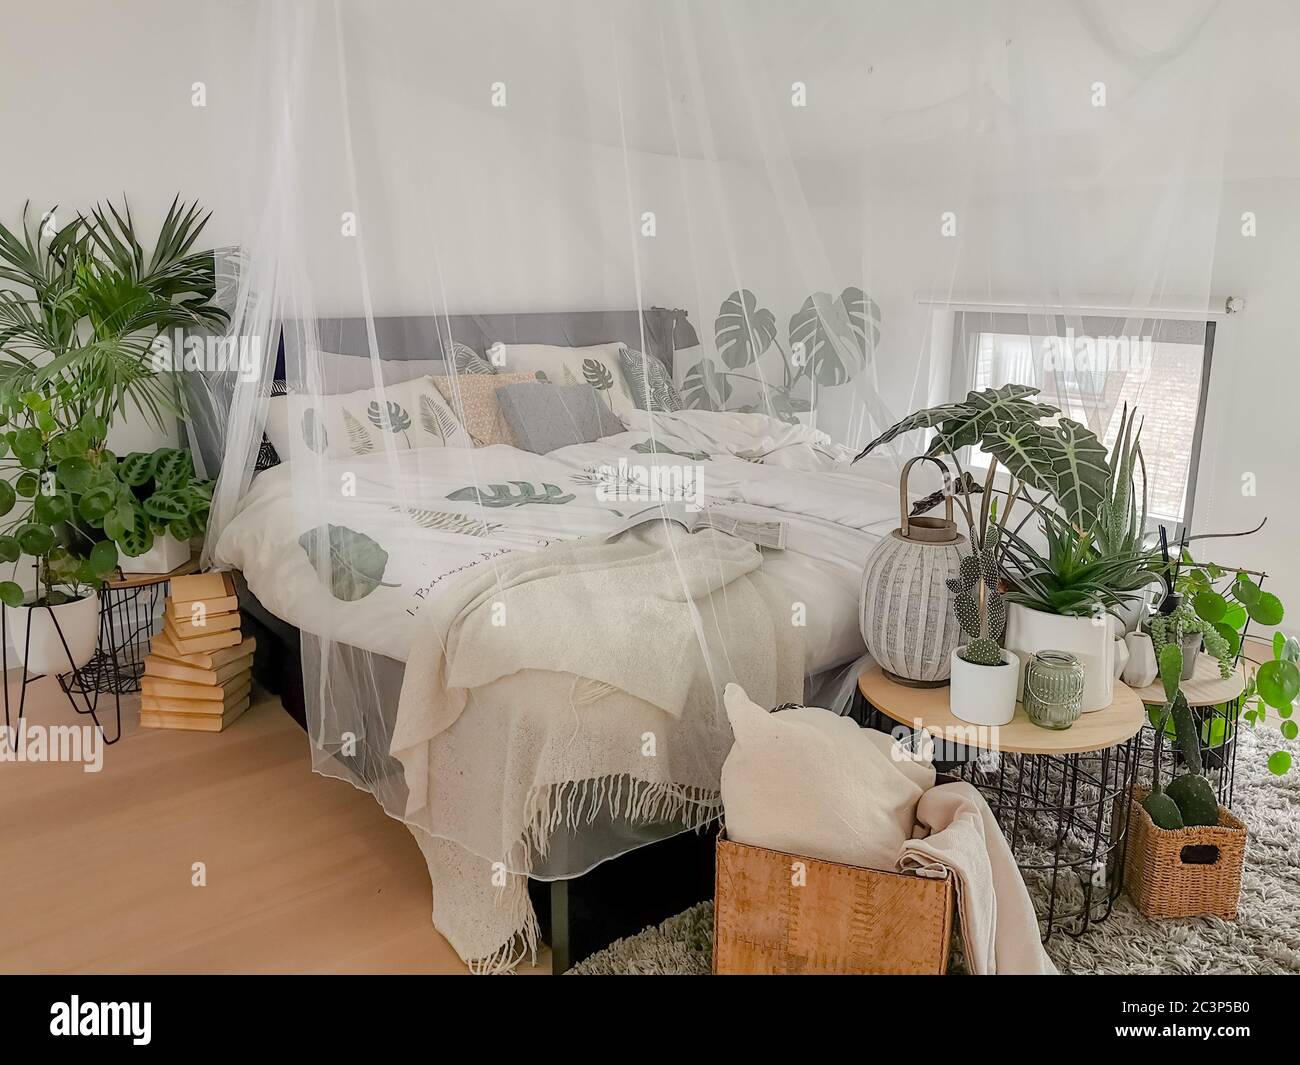 Bright white bedroom filled with numerous houseplants and flooded in natural light Stock Photo